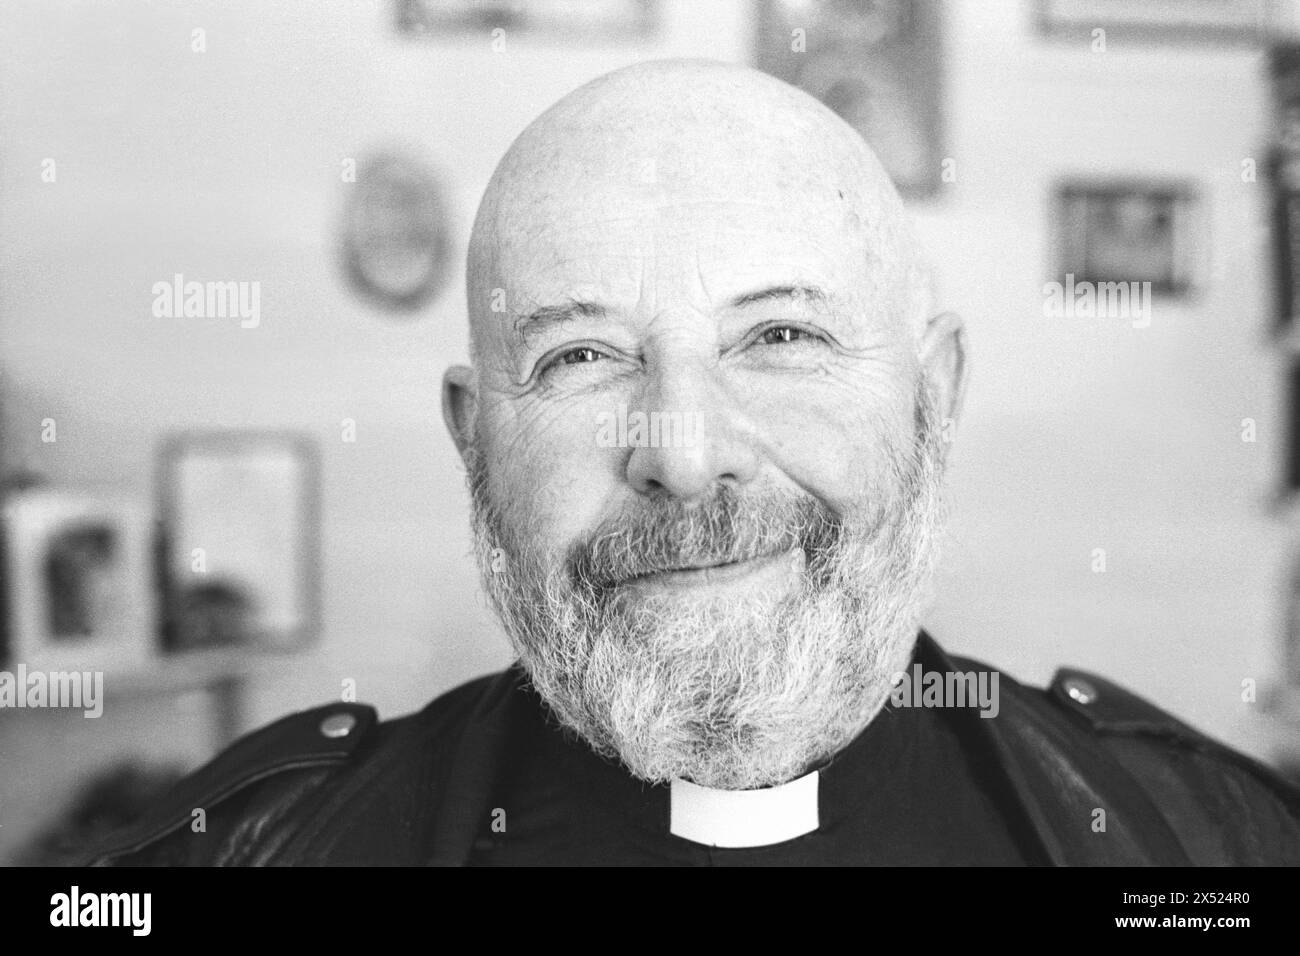 LIONEL FANTHORPE, AUTHOR, PRIEST, 1997: A portrait of author Lionel Fanthorpe at his home in Cardiff, Wales, UK on 20 January 1997. INFO: Lionel Fanthorpe, a British author and television presenter, was born on January 17, 1935, in Dereham, Norfolk, England. Renowned for his prolific output of science fiction and supernatural novels, he became a cult figure in genre fiction. Stock Photo